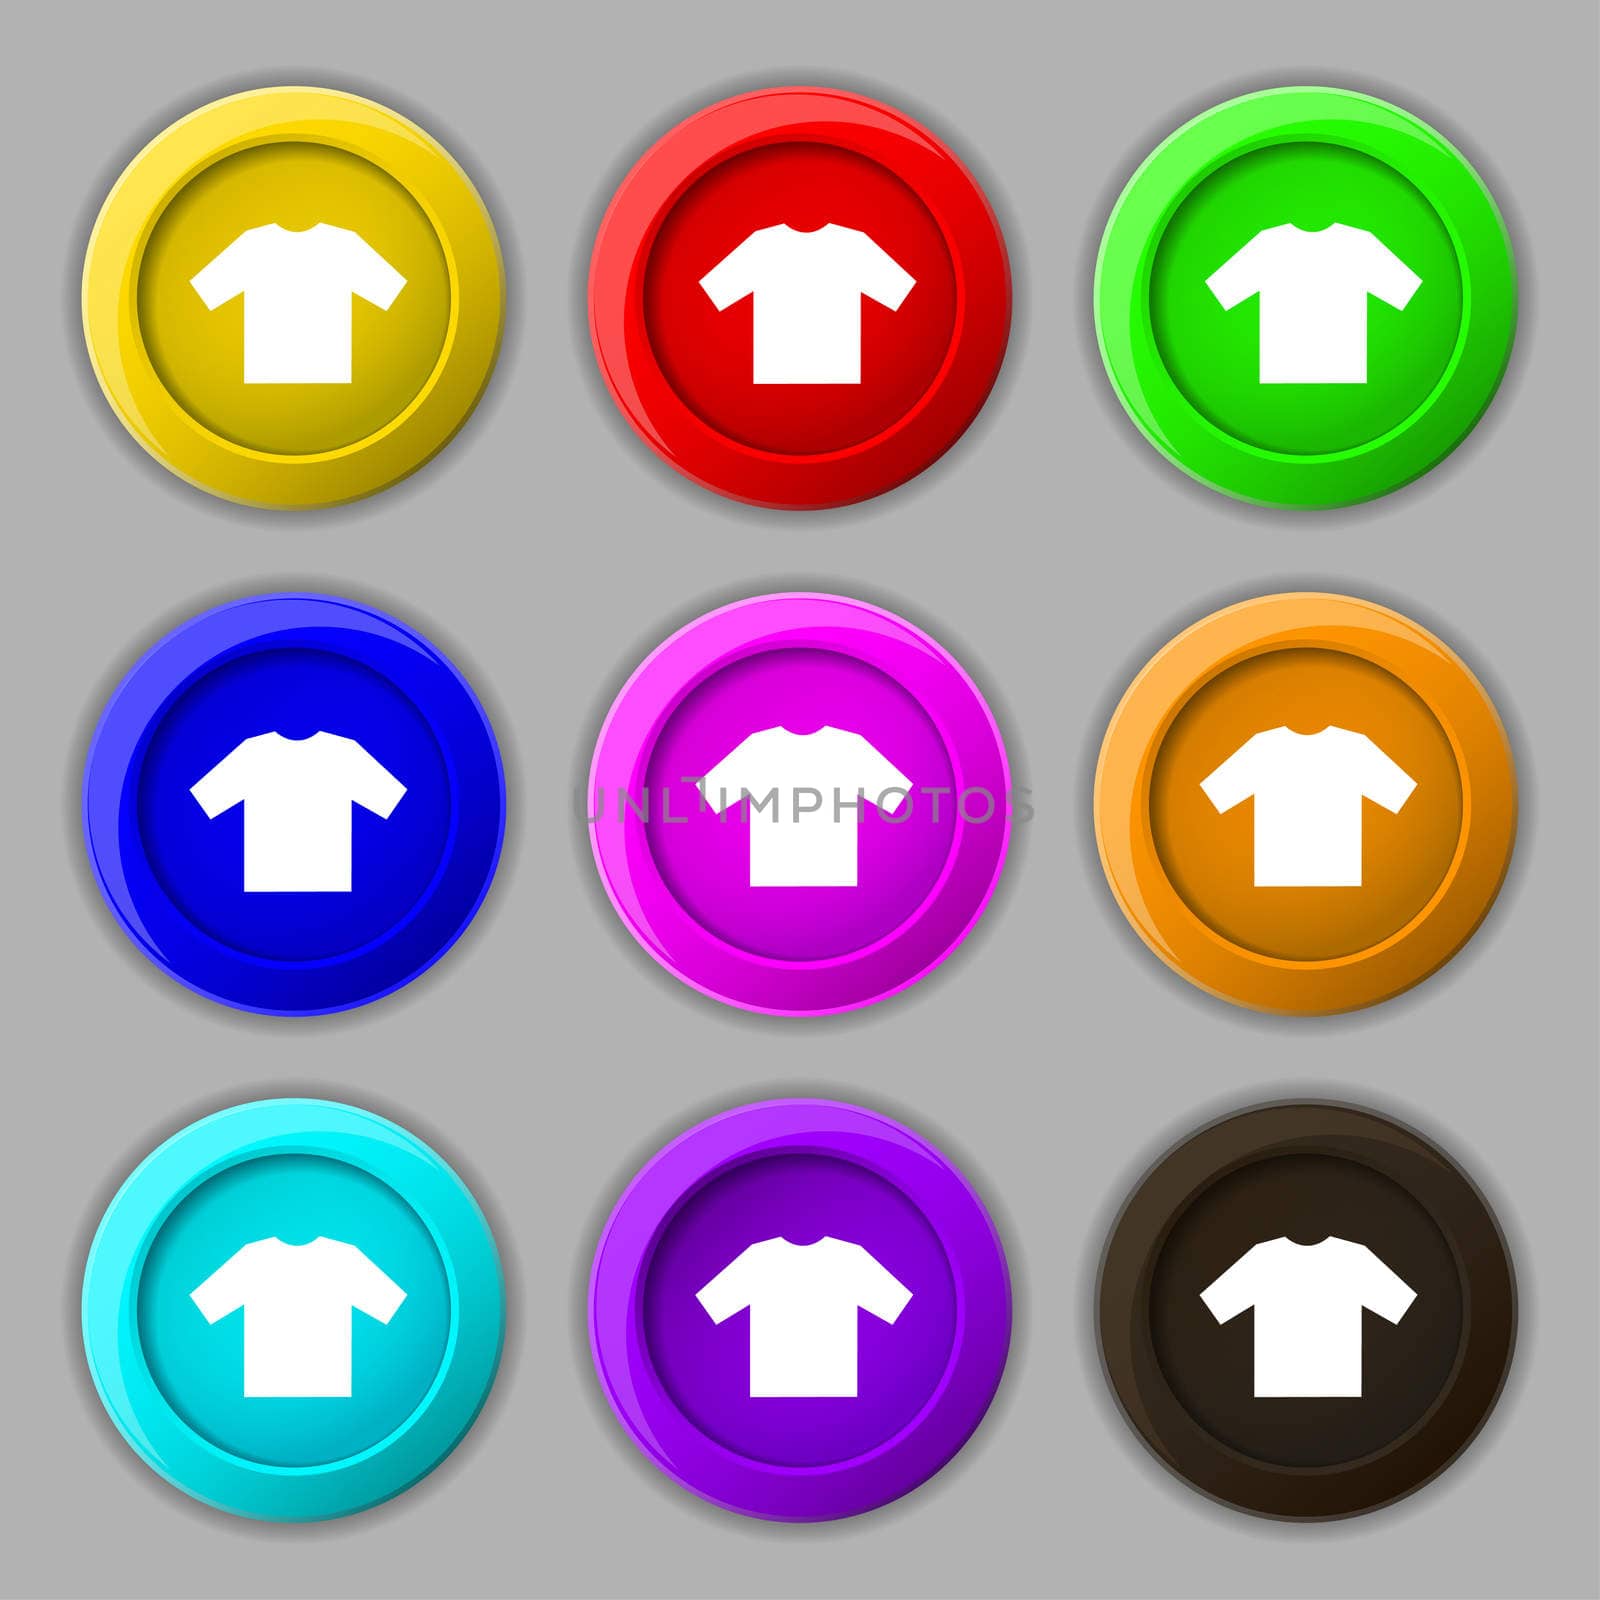 t-shirt icon sign. symbol on nine round colourful buttons. illustration